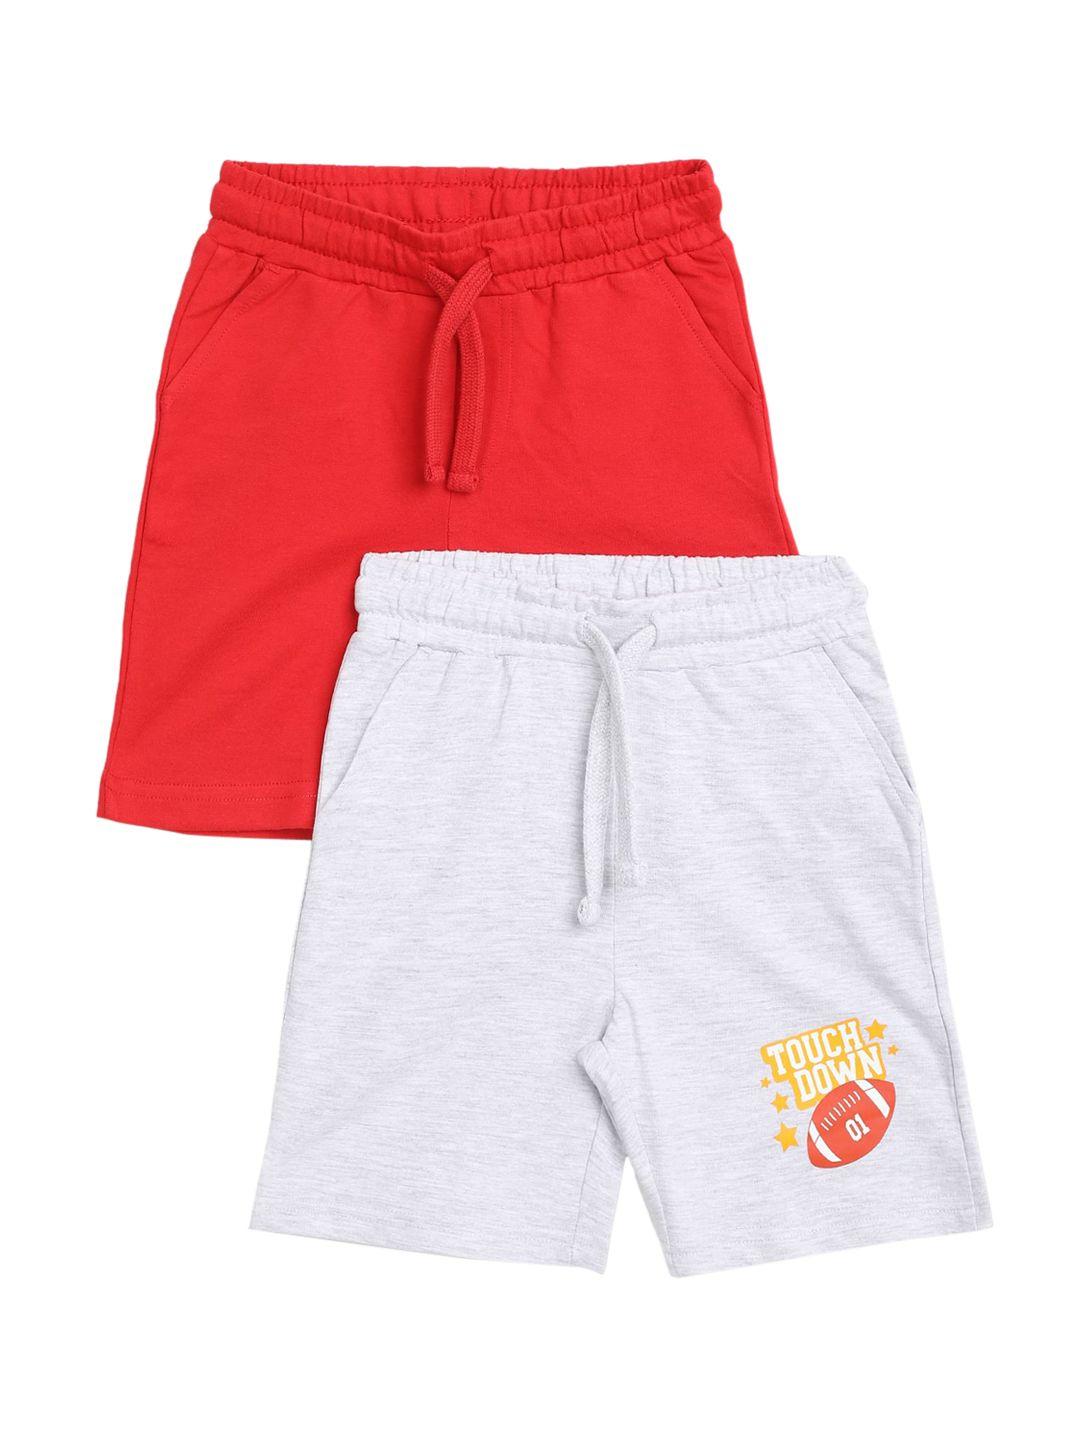 donuts-boys-pack-of-2-shorts